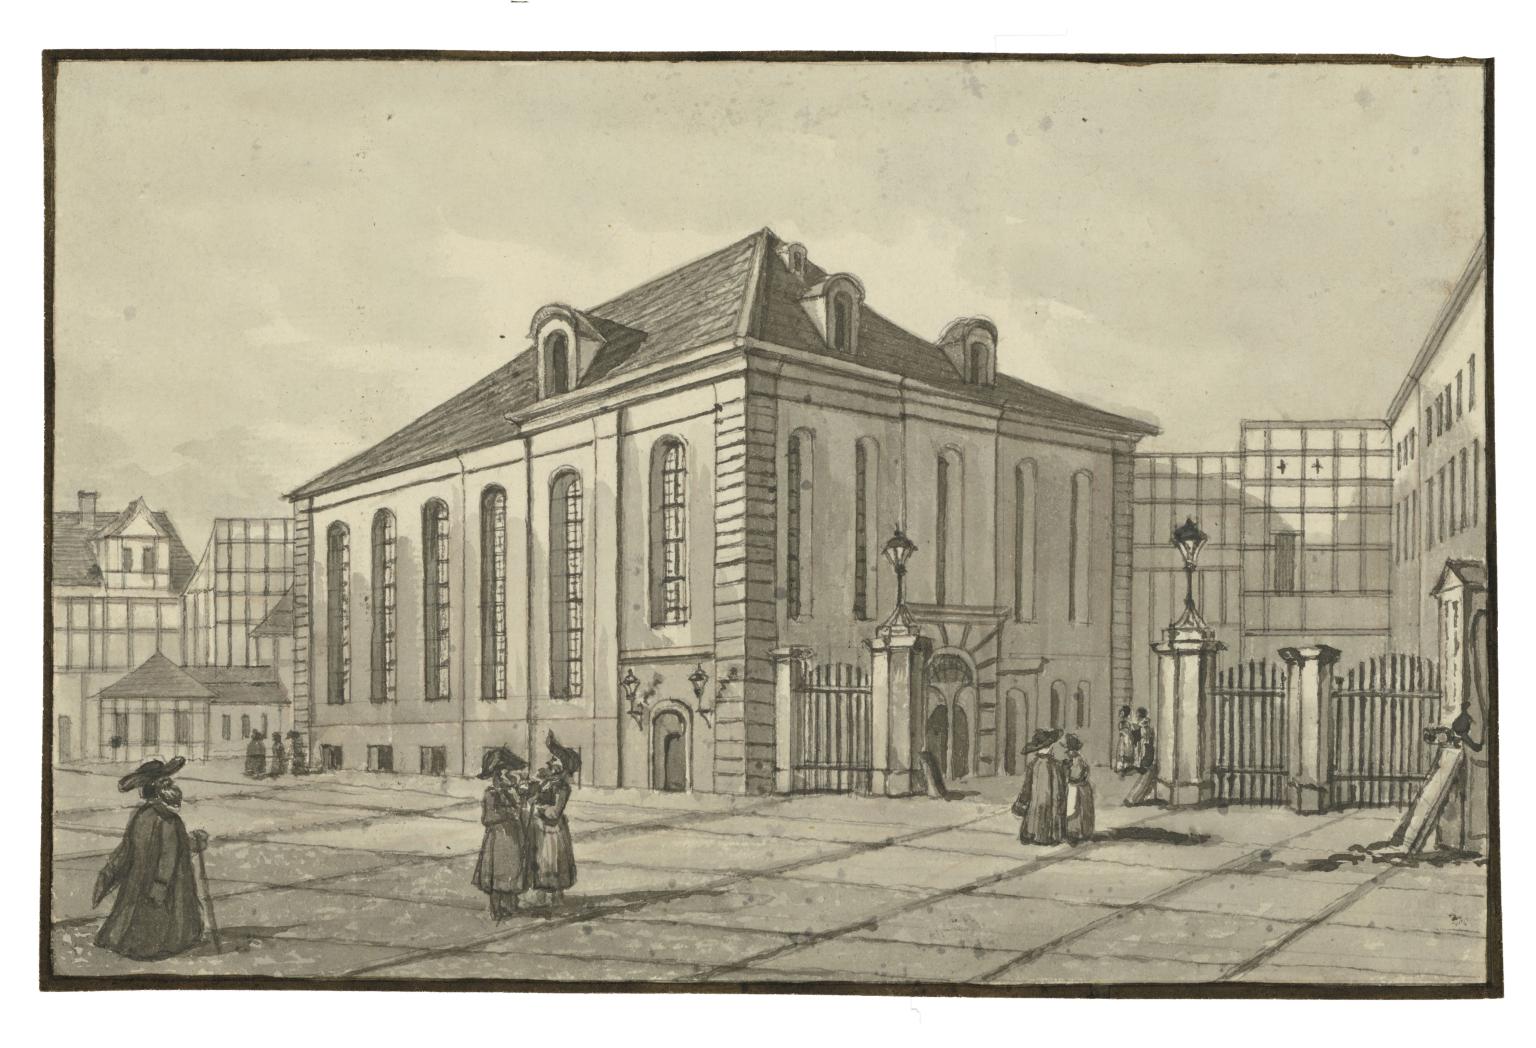 Print engraving of building exterior with tall windows and several people standing on courtyard outside.